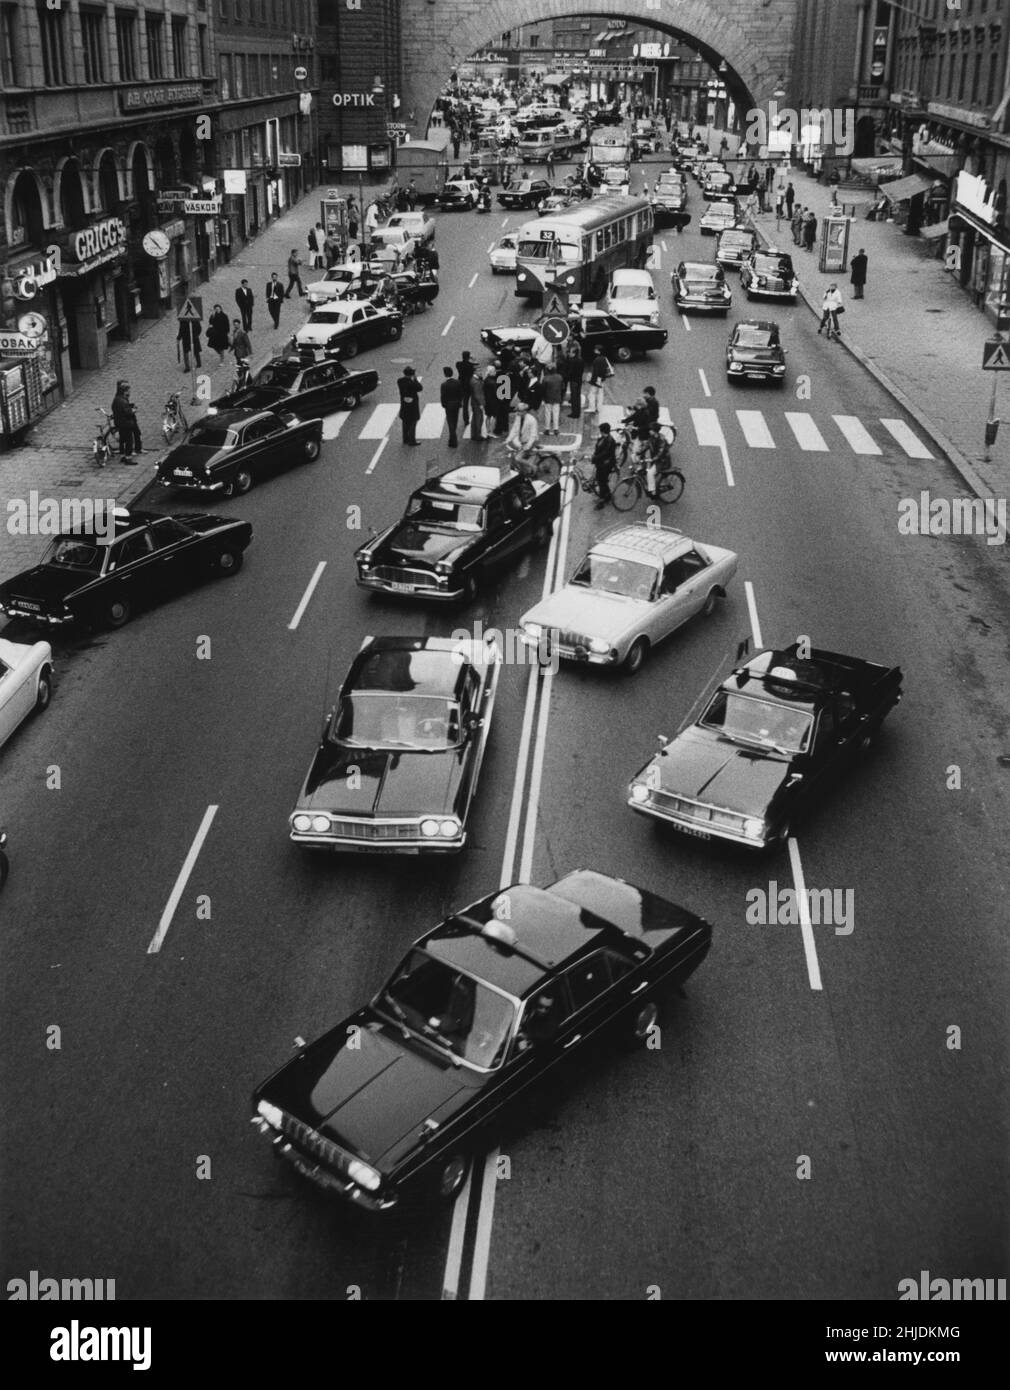 From driving on the left on the day Sweden changed to drive on the right side of the road. Picture from the moment at 5 am. on september 3 1967 when cars switches side and goes from left to right side. A major event where fears were that accidents due to the shift would be many, but instead it turned out to be the oposite way. The Stockholm street Kungsgatan. Stock Photo